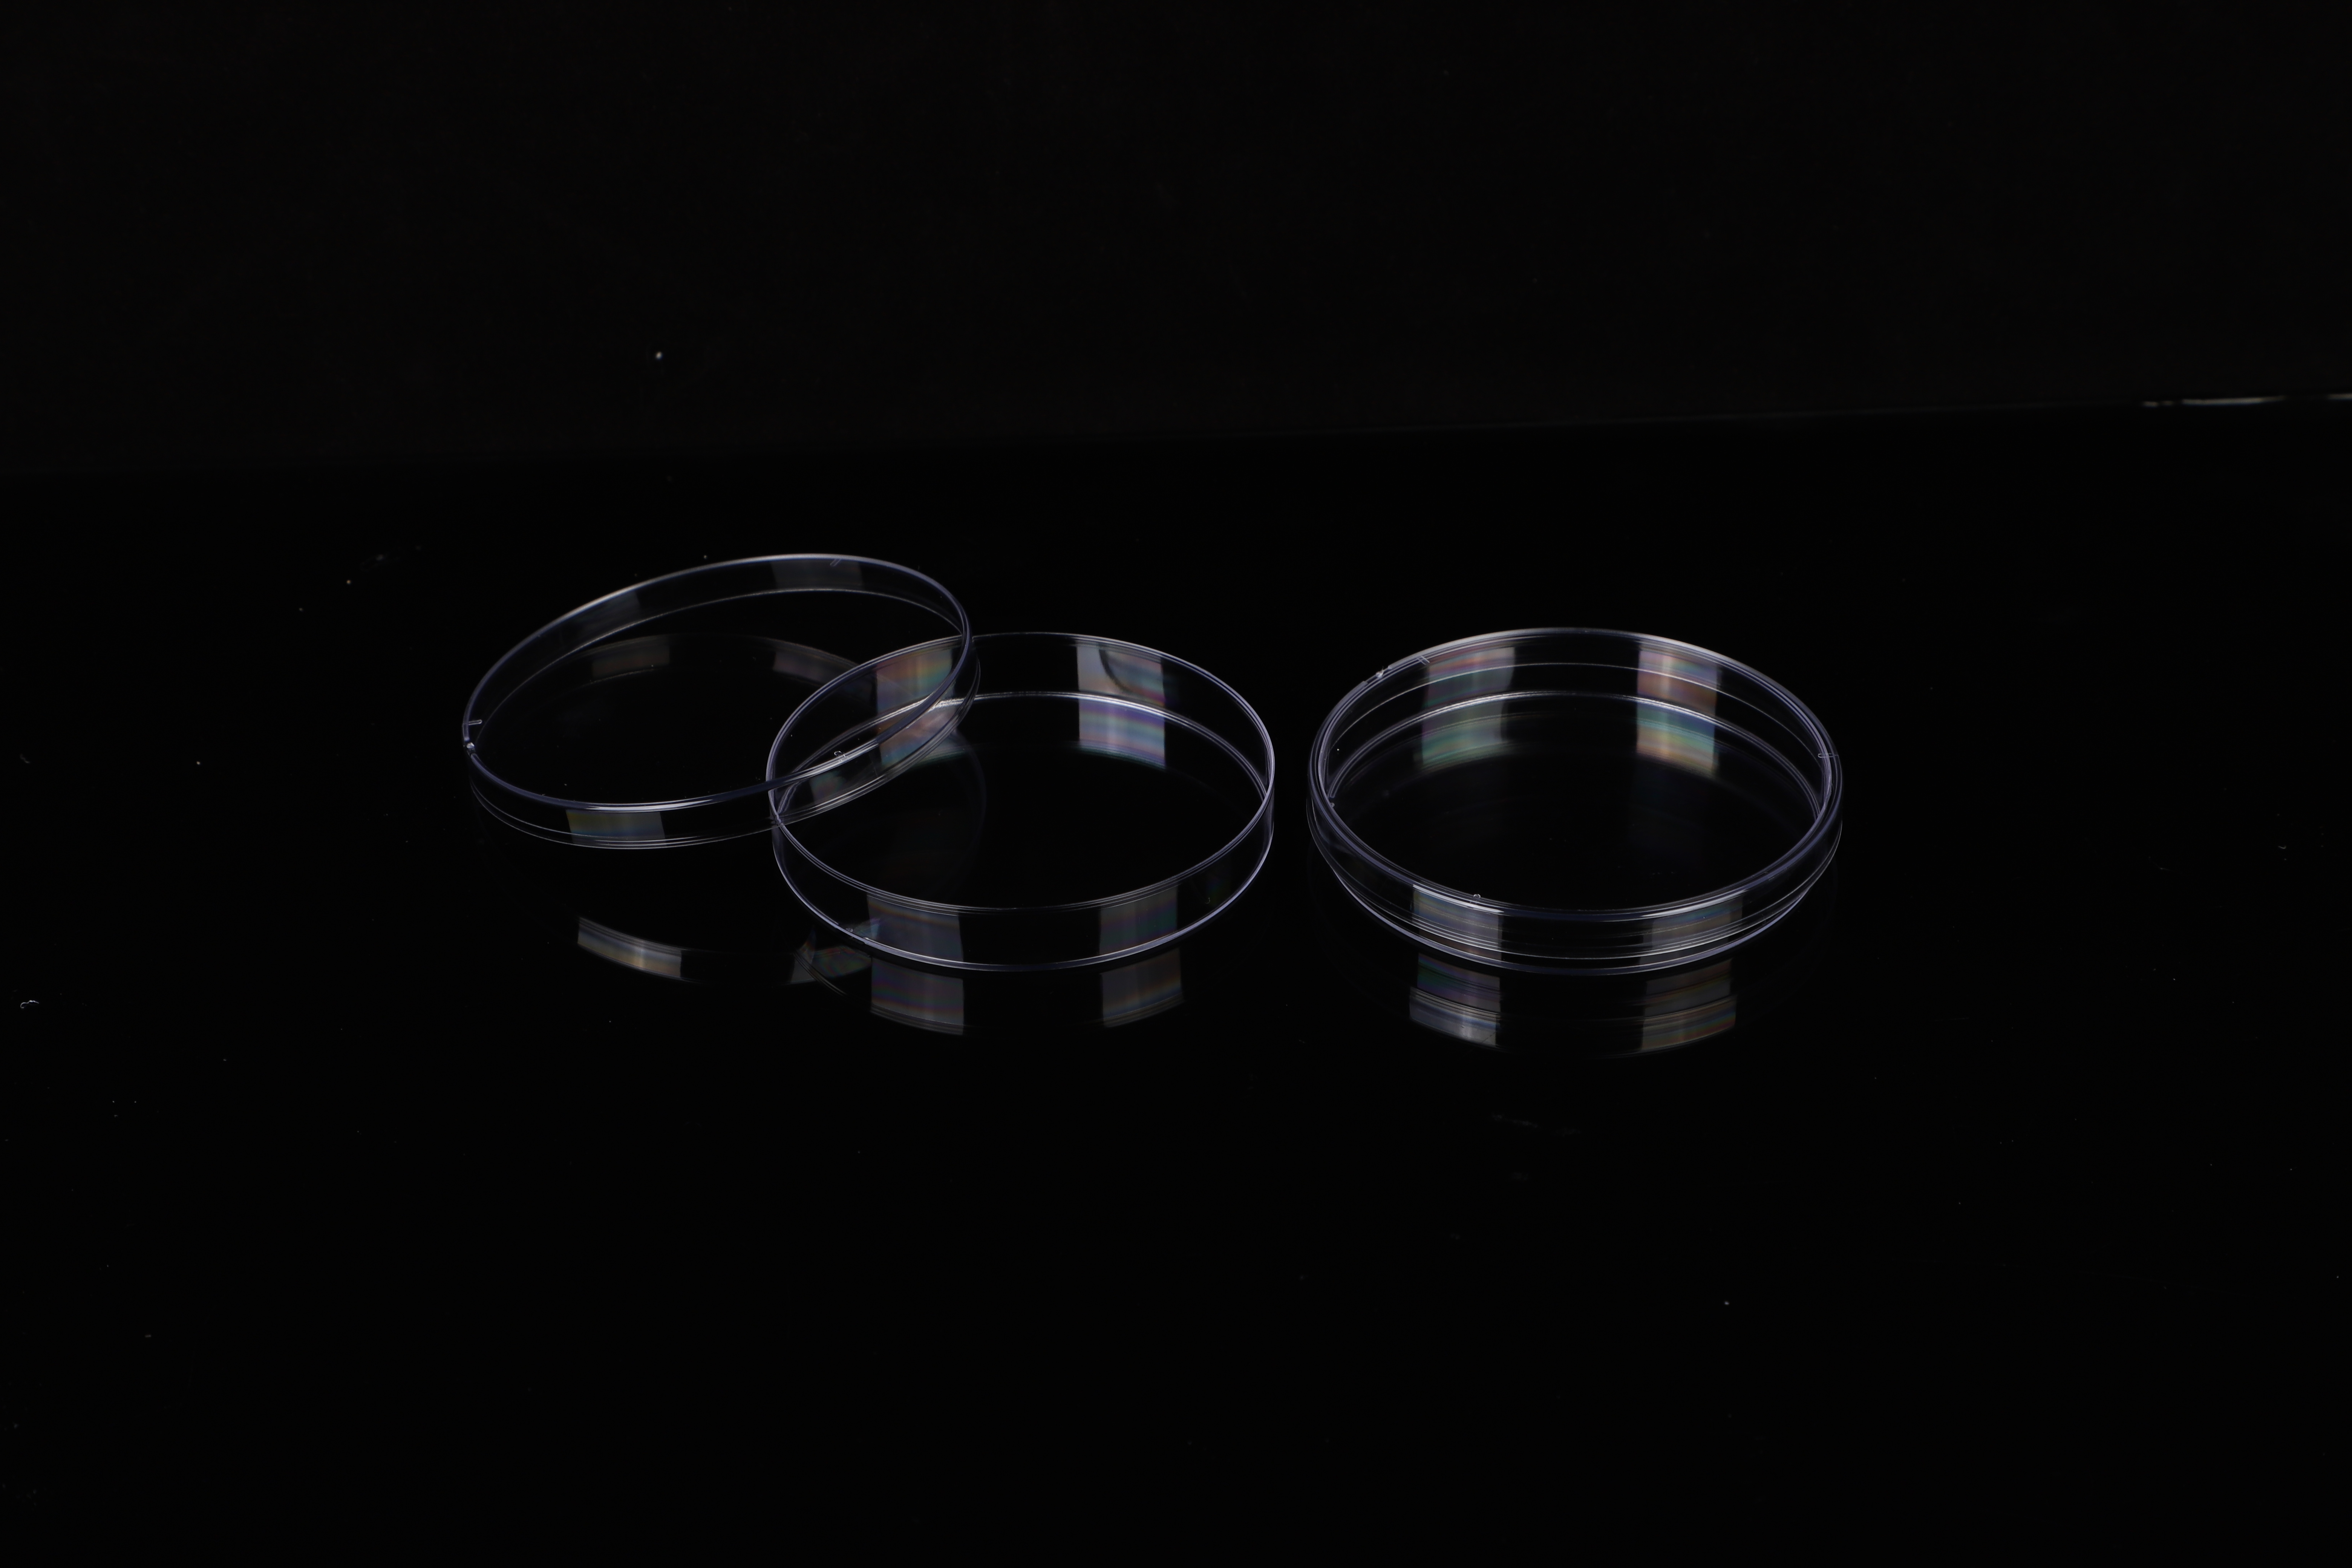 Transparent petri dishes with lids